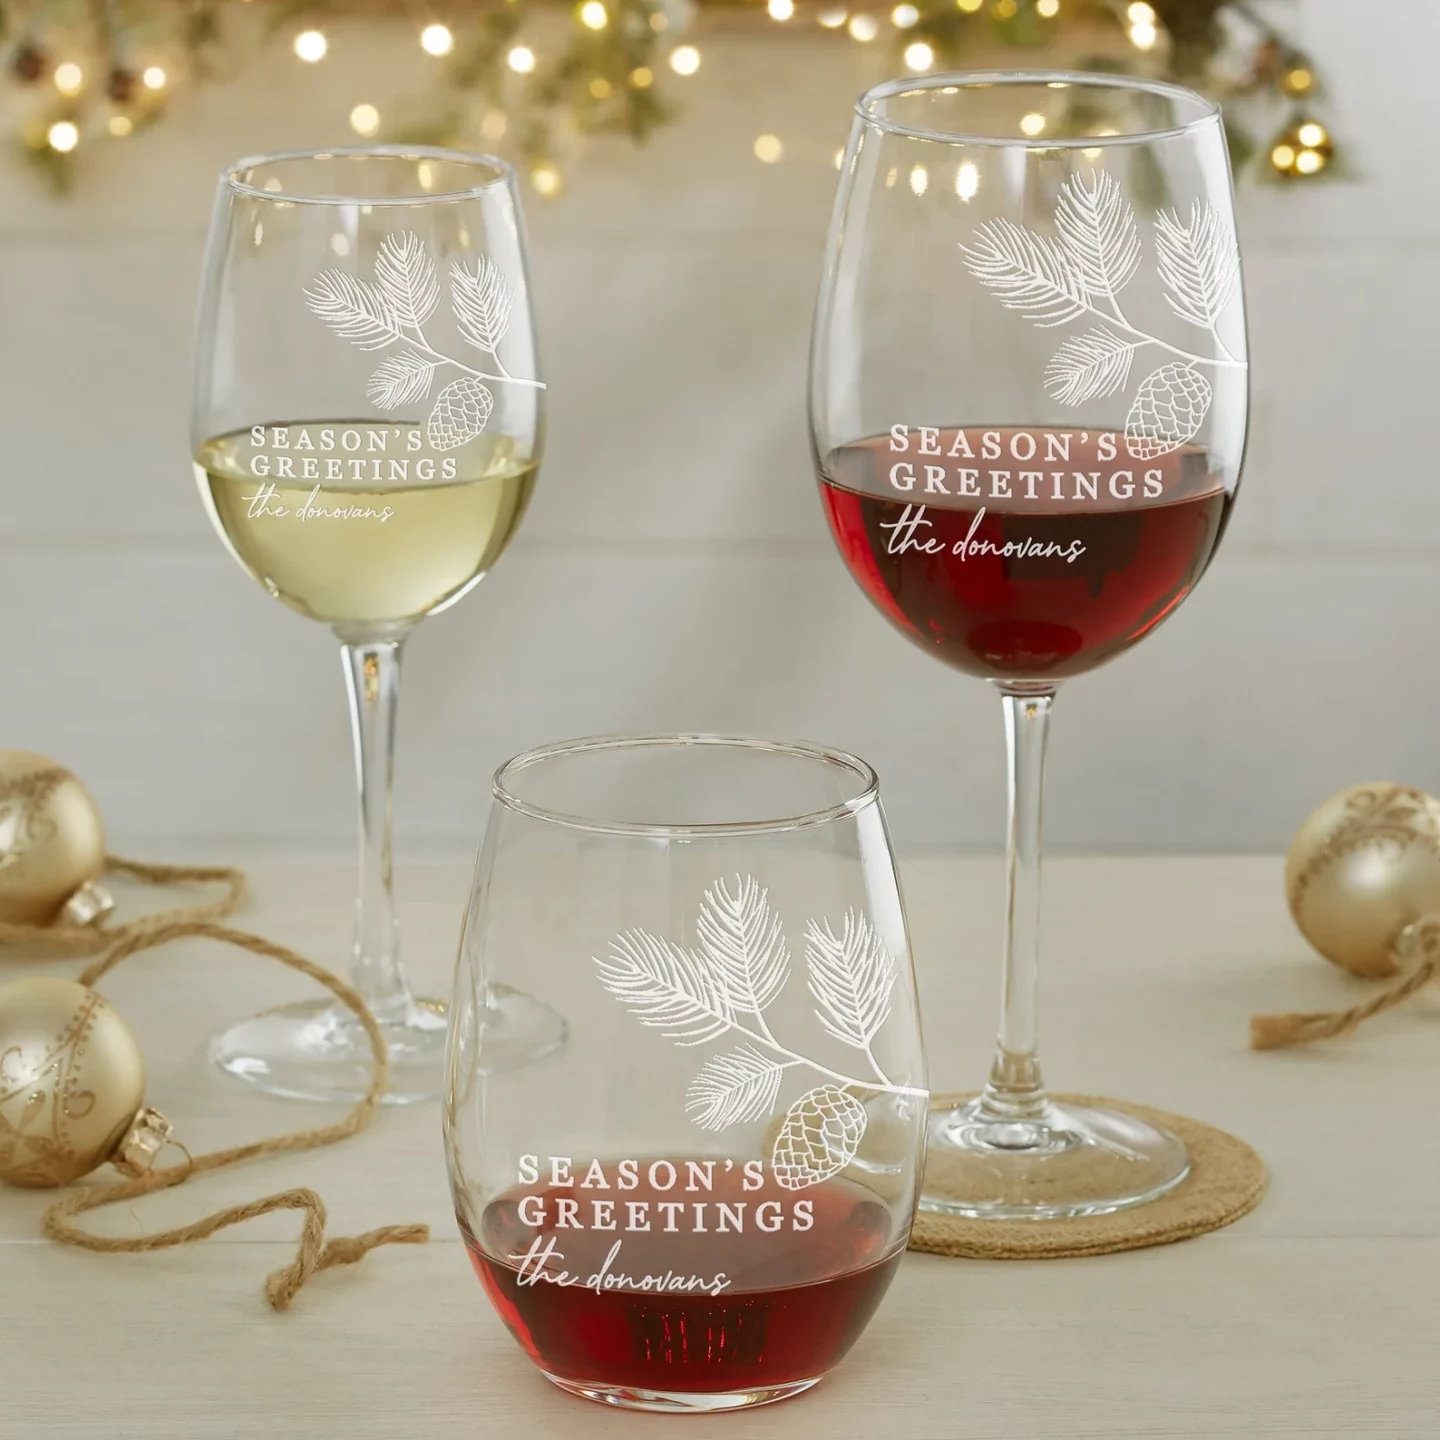 Two Stemmed Wine glasses and a Stemless Wine Glass pictured in front of holiday decor